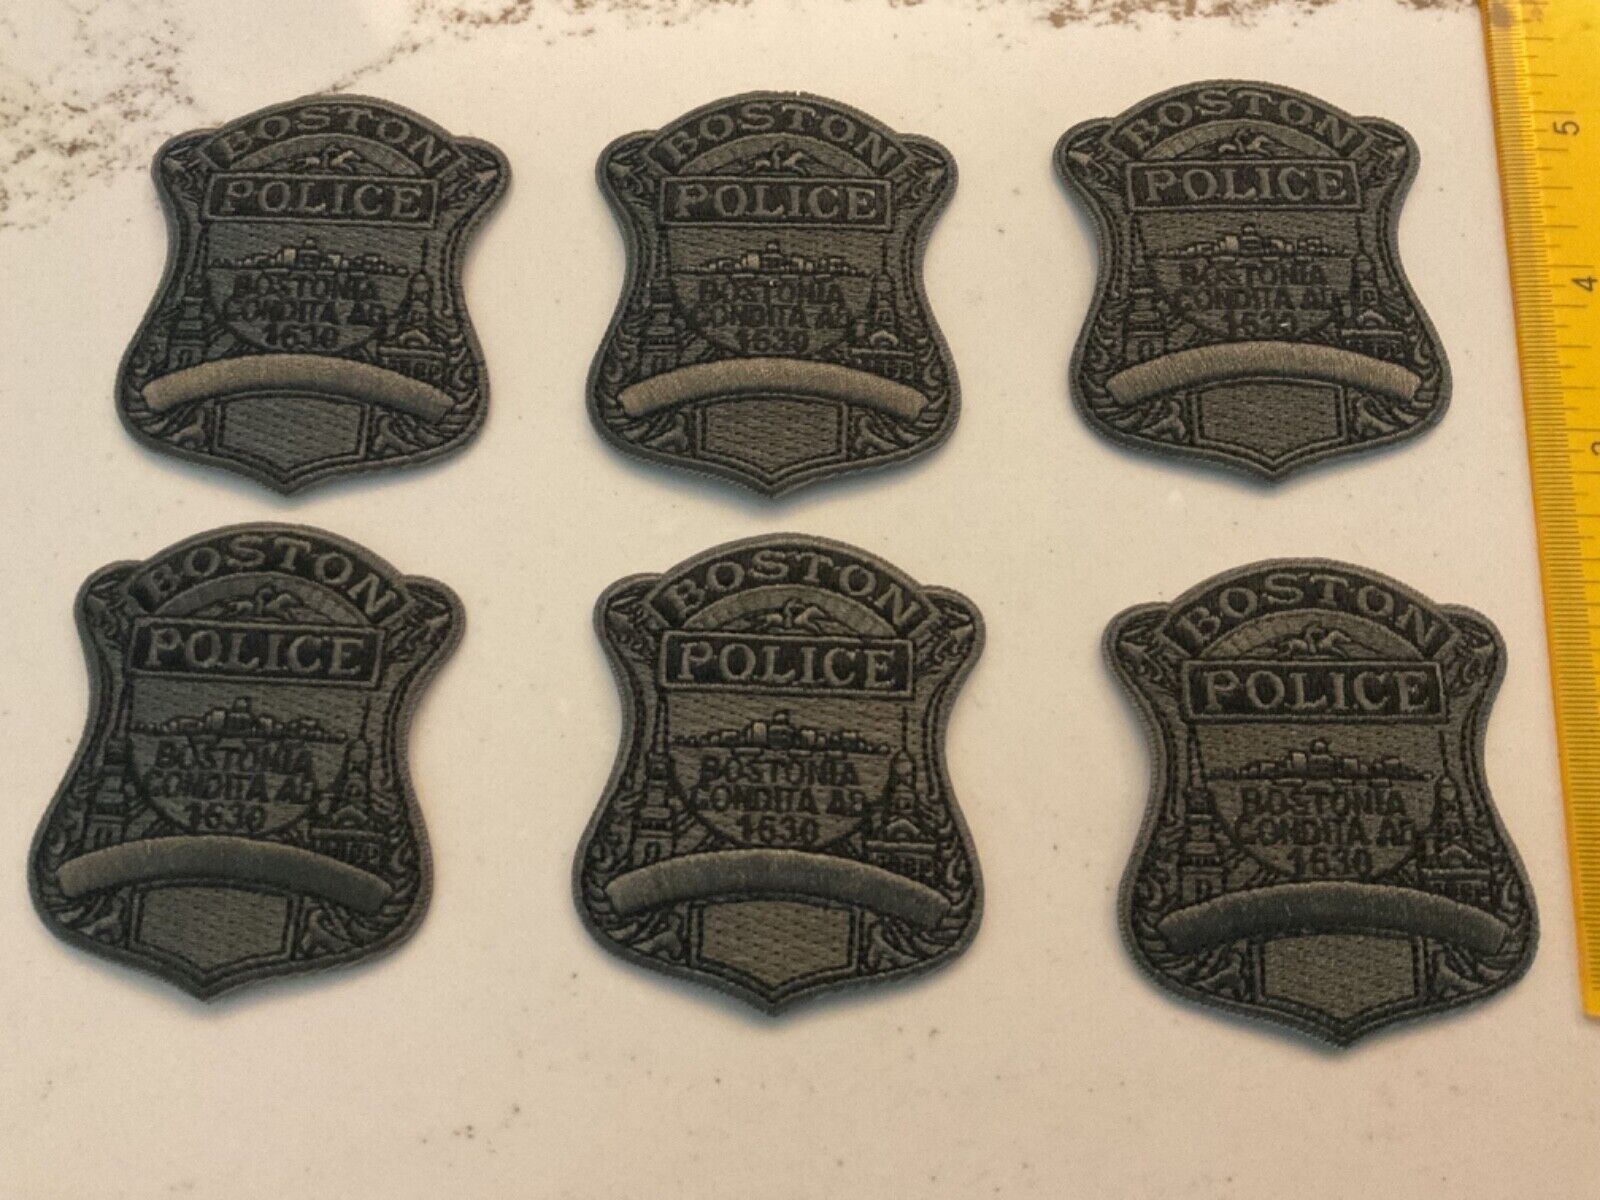 Boston Police Massachusetts Subdued Patch Set all new condition.